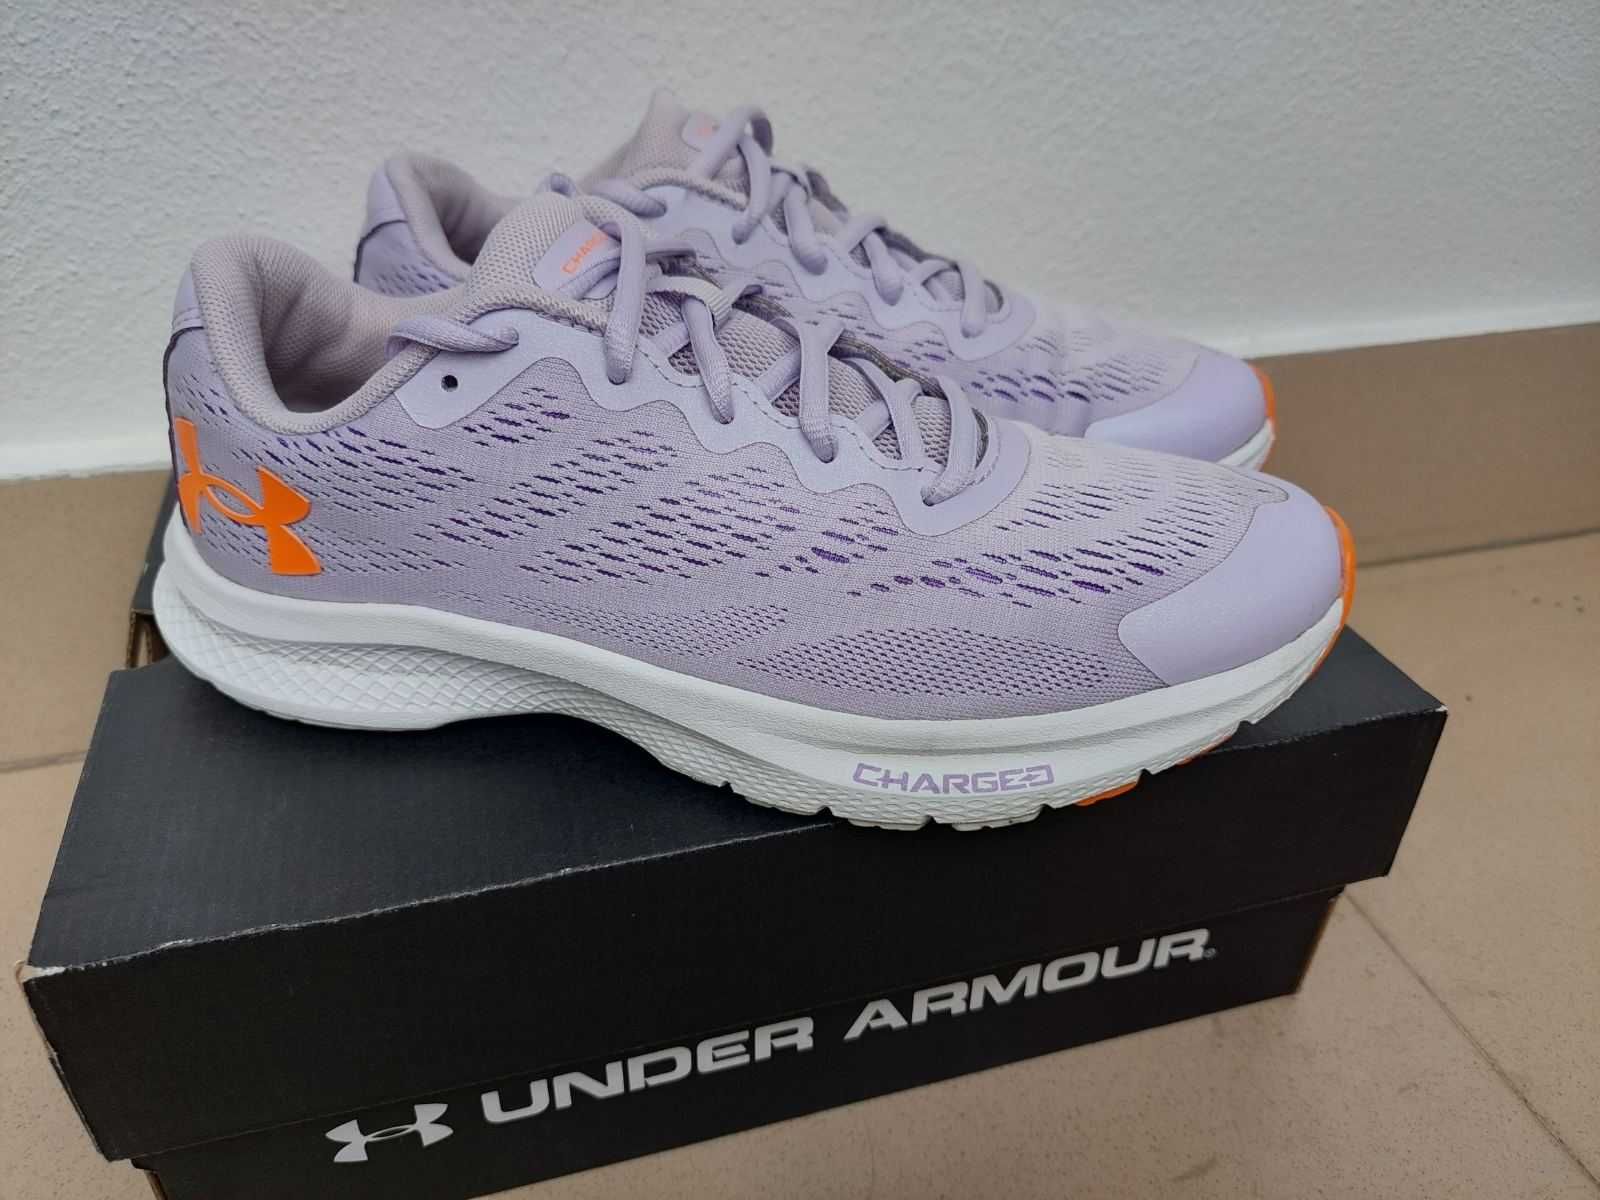 Under Armour Charged Bandit-39(38)номер